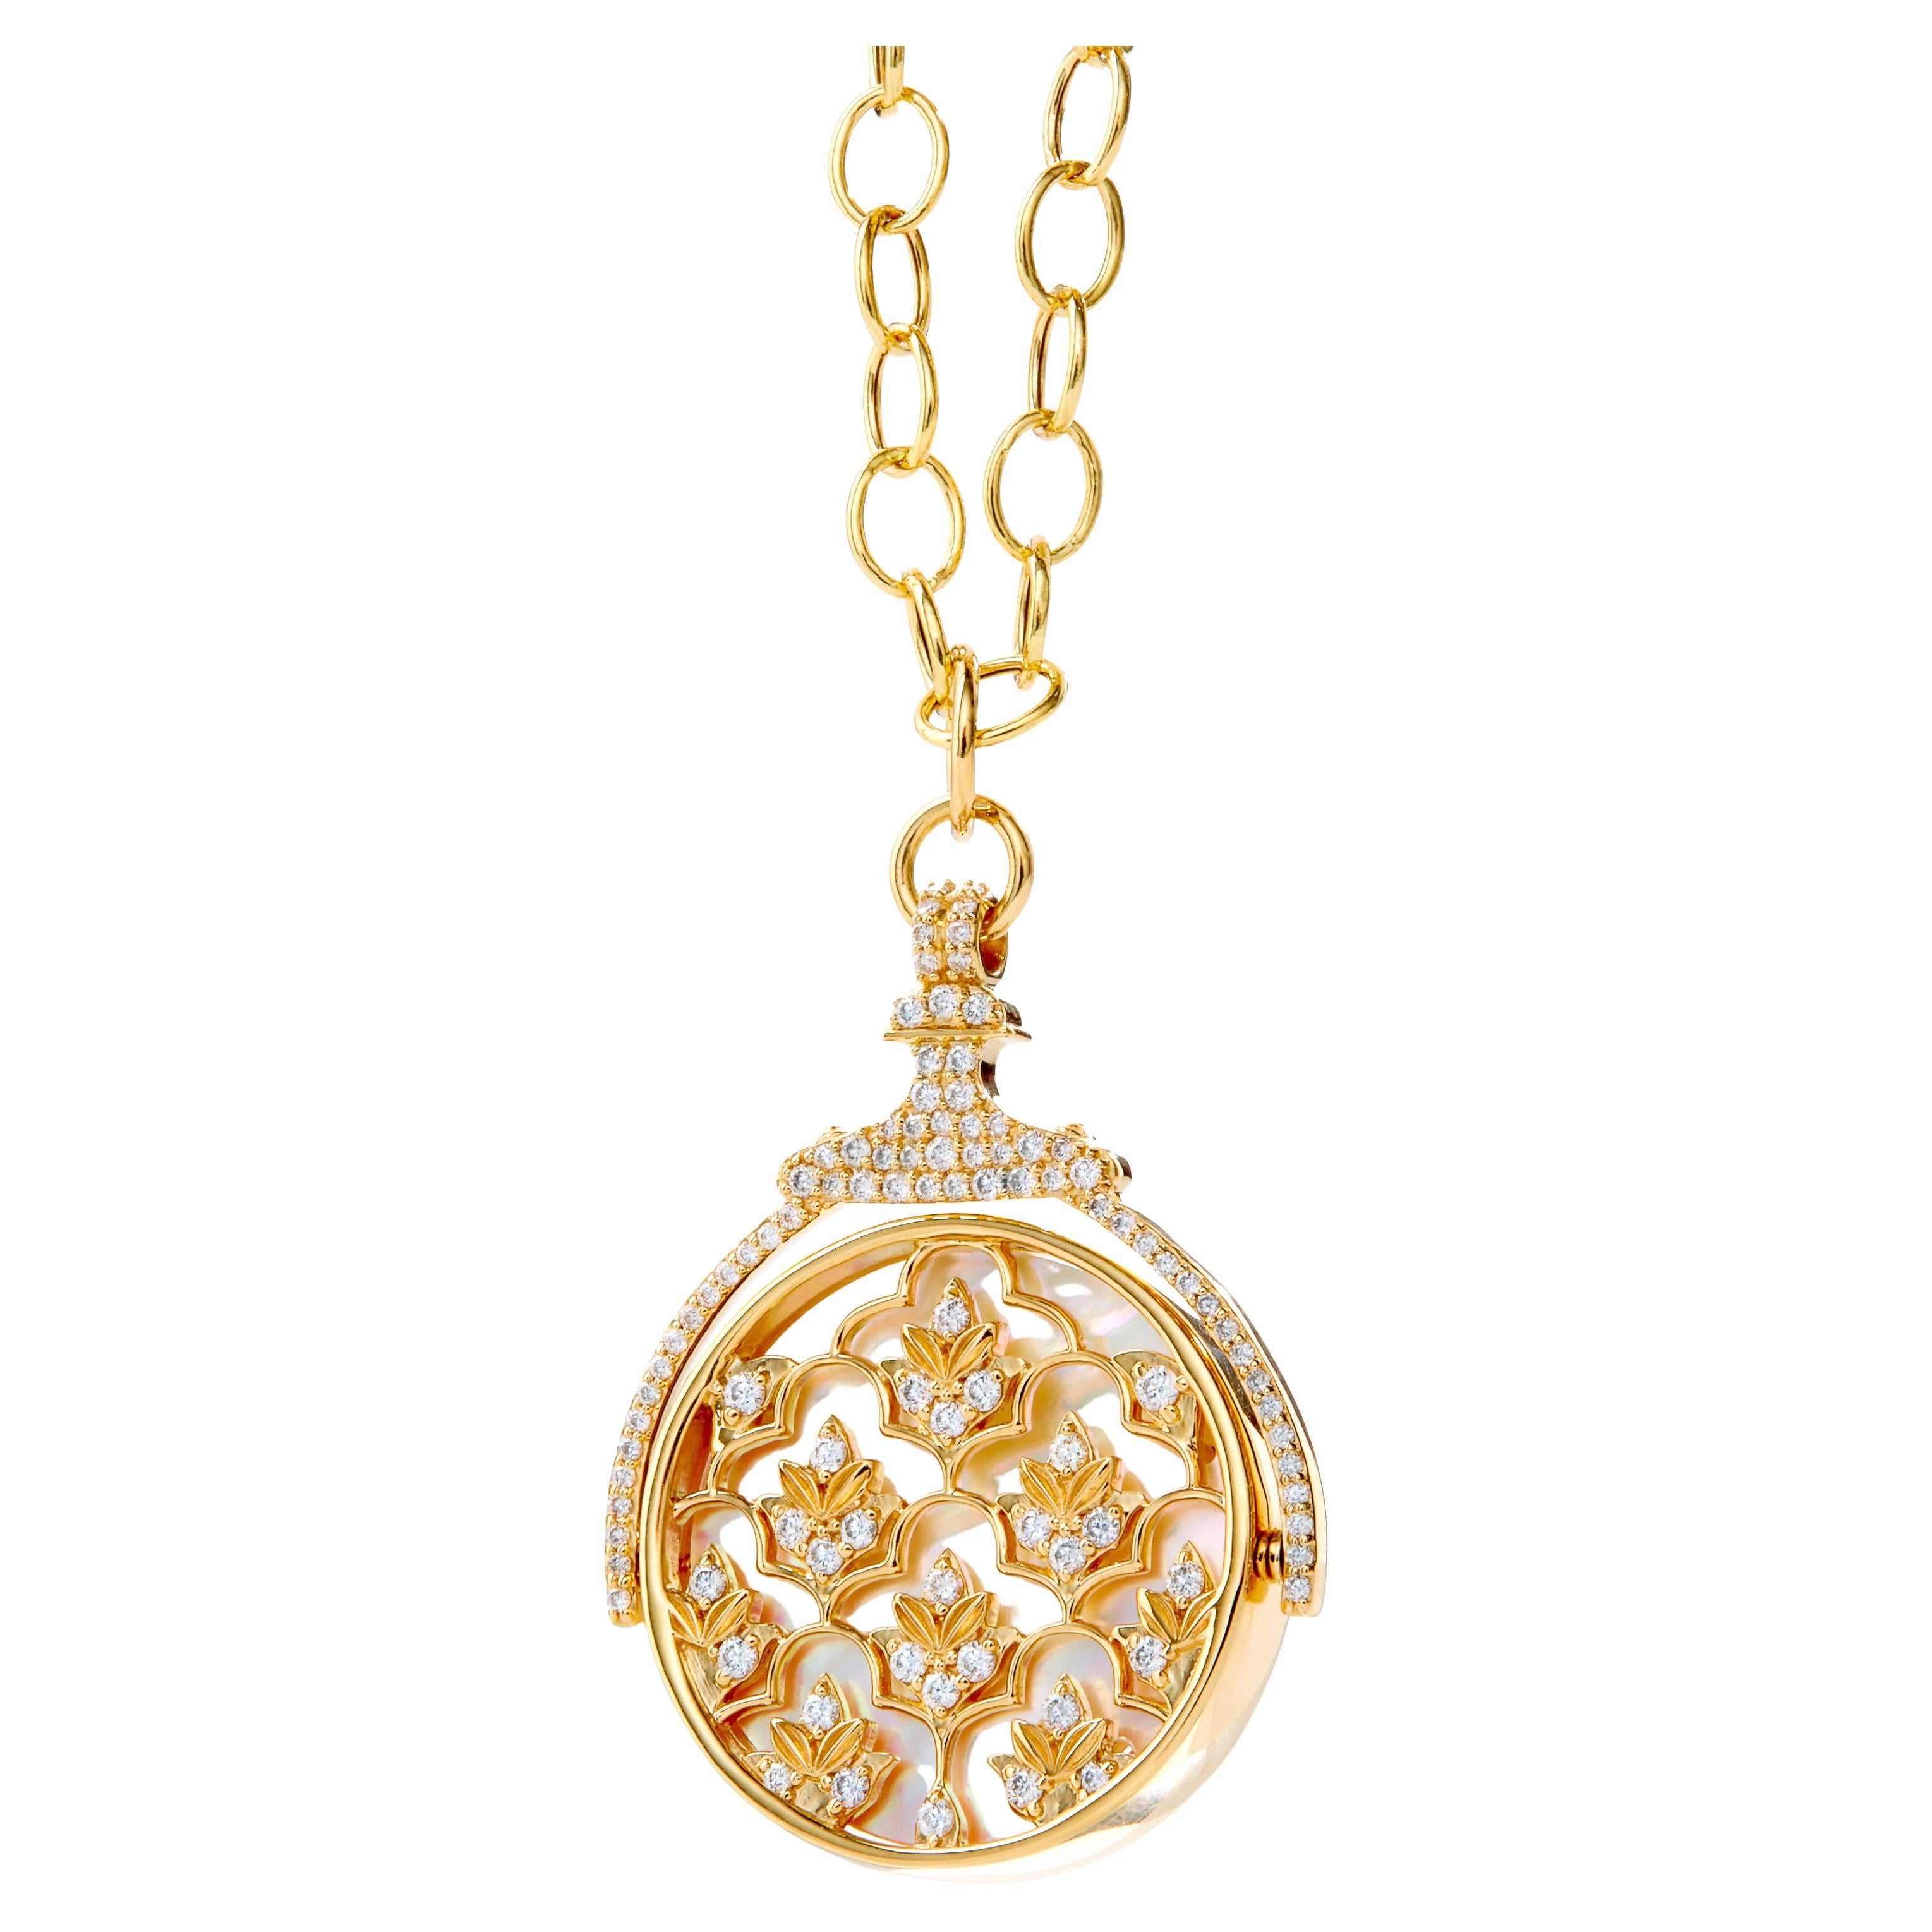 Created in 18 karat yellow gold
Mother of pearl 8.50 carats approx.
Diamonds 0.90 carat approx.
Chain sold separately

This luxurious pendant is handcrafted from 18 karat yellow gold and features an exquisite 8.50 carat Mother of Pearl stone,